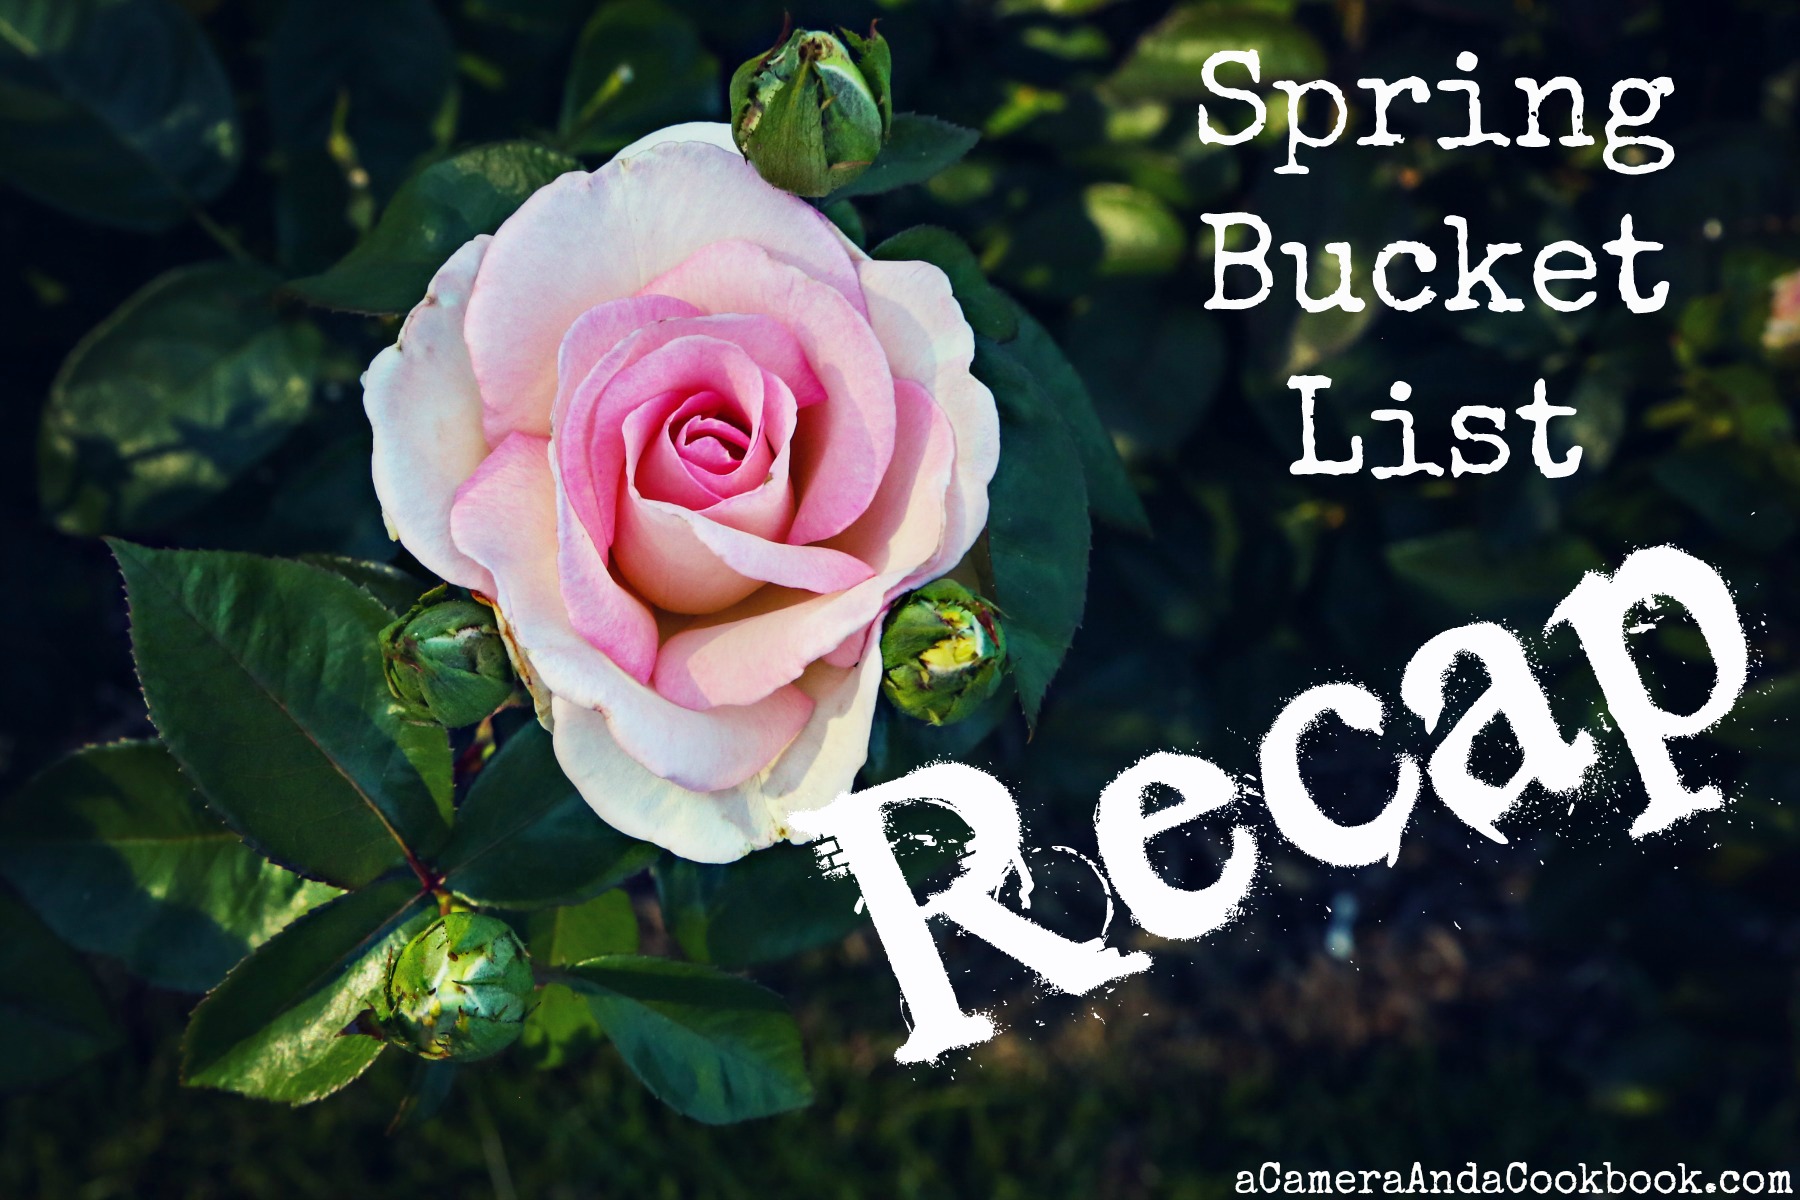 Spring Bucket List Recap 2018 - What did you do this spring?